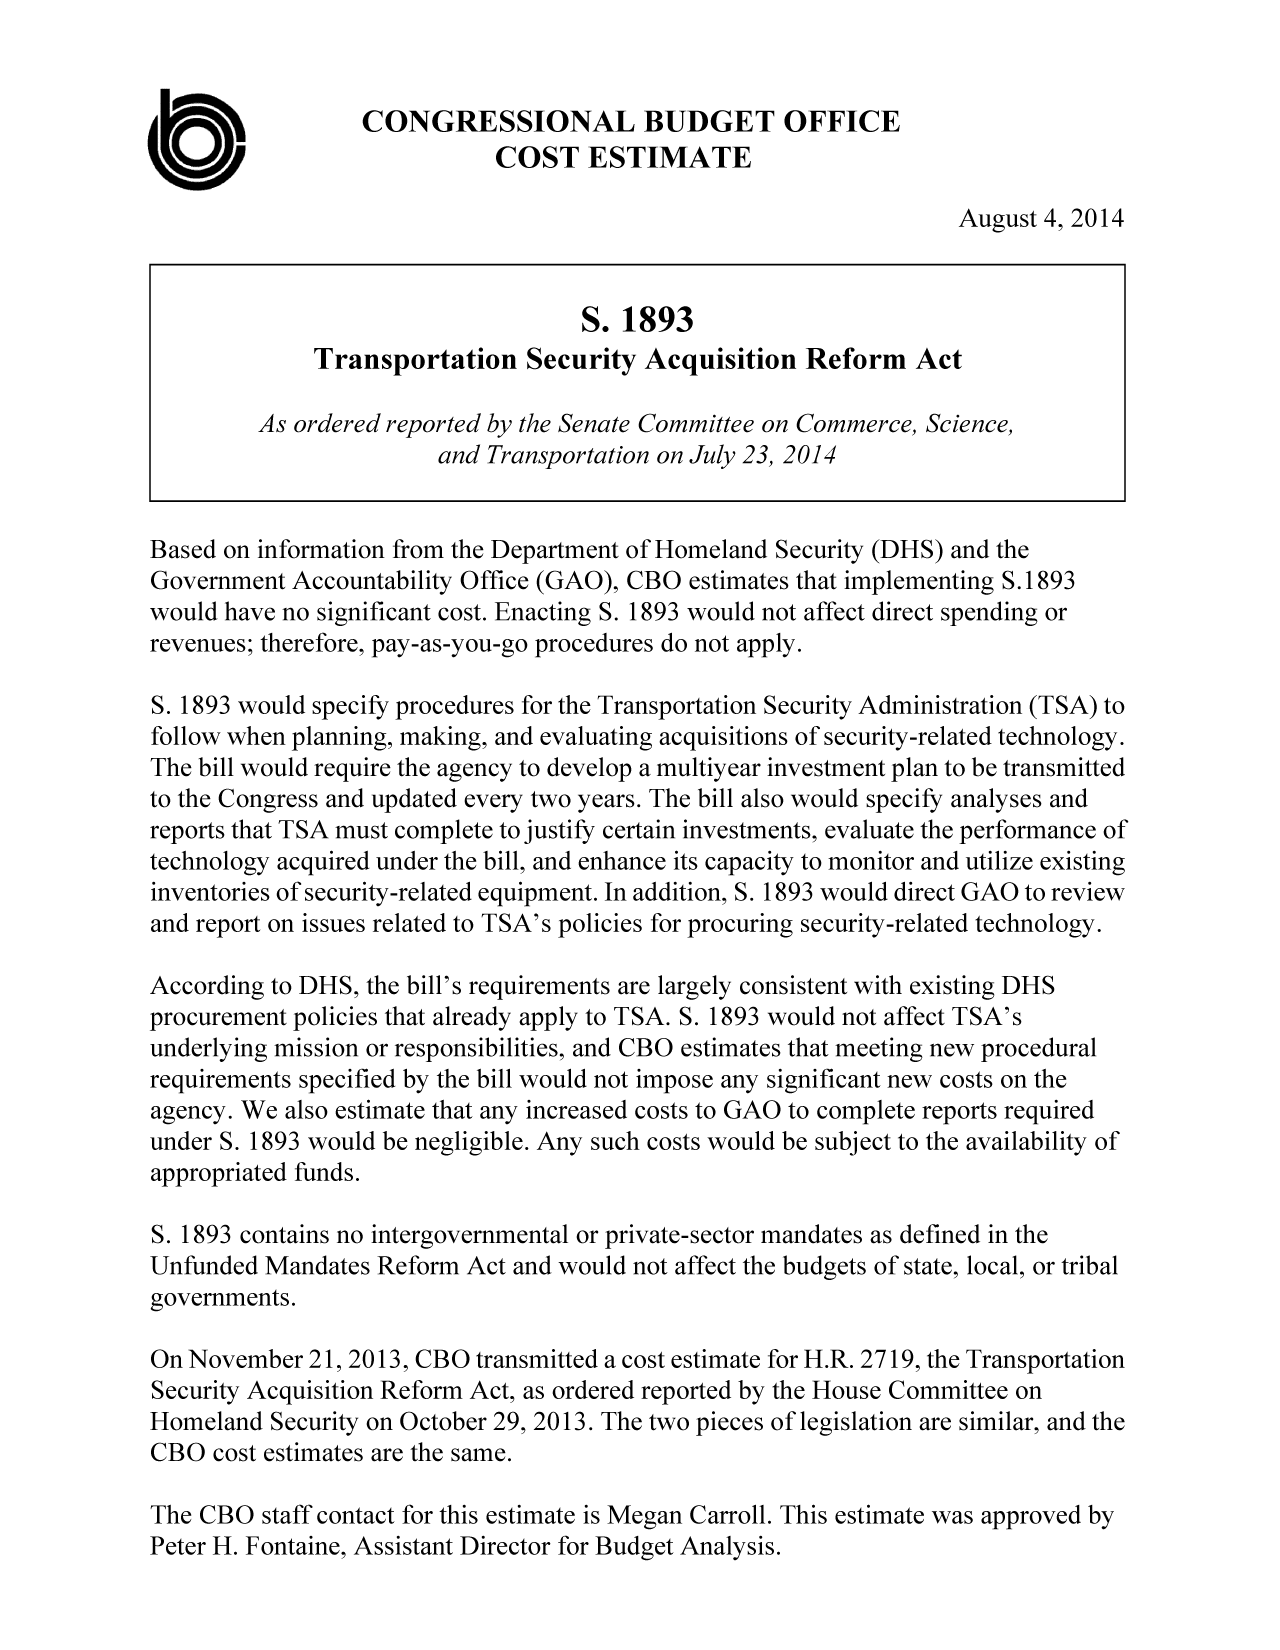 handle is hein.congrec/cbo1836 and id is 1 raw text is: CONGRESSIONAL BUDGET OFFICE
COST ESTIMATE
August 4, 2014
S. 1893
Transportation Security Acquisition Reform Act
As ordered reported by the Senate Committee on Commerce, Science,
and Transportation on July 23, 2014
Based on information from the Department of Homeland Security (DHS) and the
Government Accountability Office (GAO), CBO estimates that implementing S.1893
would have no significant cost. Enacting S. 1893 would not affect direct spending or
revenues; therefore, pay-as-you-go procedures do not apply.
S. 1893 would specify procedures for the Transportation Security Administration (TSA) to
follow when planning, making, and evaluating acquisitions of security-related technology.
The bill would require the agency to develop a multiyear investment plan to be transmitted
to the Congress and updated every two years. The bill also would specify analyses and
reports that TSA must complete to justify certain investments, evaluate the performance of
technology acquired under the bill, and enhance its capacity to monitor and utilize existing
inventories of security-related equipment. In addition, S. 1893 would direct GAO to review
and report on issues related to TSA's policies for procuring security-related technology.
According to DHS, the bill's requirements are largely consistent with existing DHS
procurement policies that already apply to TSA. S. 1893 would not affect TSA's
underlying mission or responsibilities, and CBO estimates that meeting new procedural
requirements specified by the bill would not impose any significant new costs on the
agency. We also estimate that any increased costs to GAO to complete reports required
under S. 1893 would be negligible. Any such costs would be subject to the availability of
appropriated funds.
S. 1893 contains no intergovernmental or private-sector mandates as defined in the
Unfunded Mandates Reform Act and would not affect the budgets of state, local, or tribal
governments.
On November 21, 2013, CBO transmitted a cost estimate for H.R. 2719, the Transportation
Security Acquisition Reform Act, as ordered reported by the House Committee on
Homeland Security on October 29, 2013. The two pieces of legislation are similar, and the
CBO cost estimates are the same.

The CBO staff contact for this estimate is Megan Carroll. This estimate was approved by
Peter H. Fontaine, Assistant Director for Budget Analysis.


